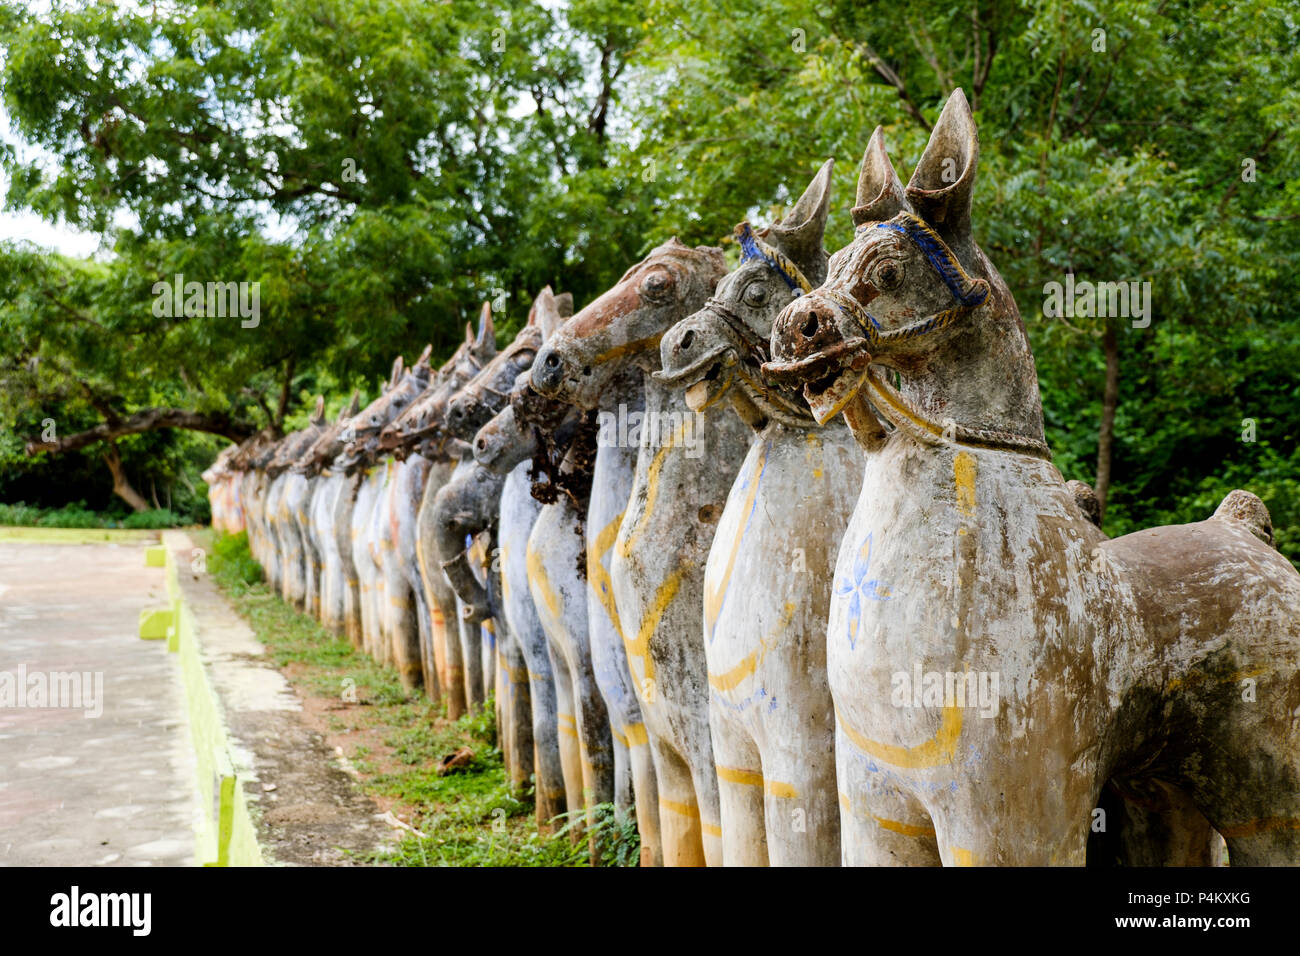 Painted terracotta horse statues at a village temple dedicated to Ayyanar god, Tamil Nadu, India. Stock Photo